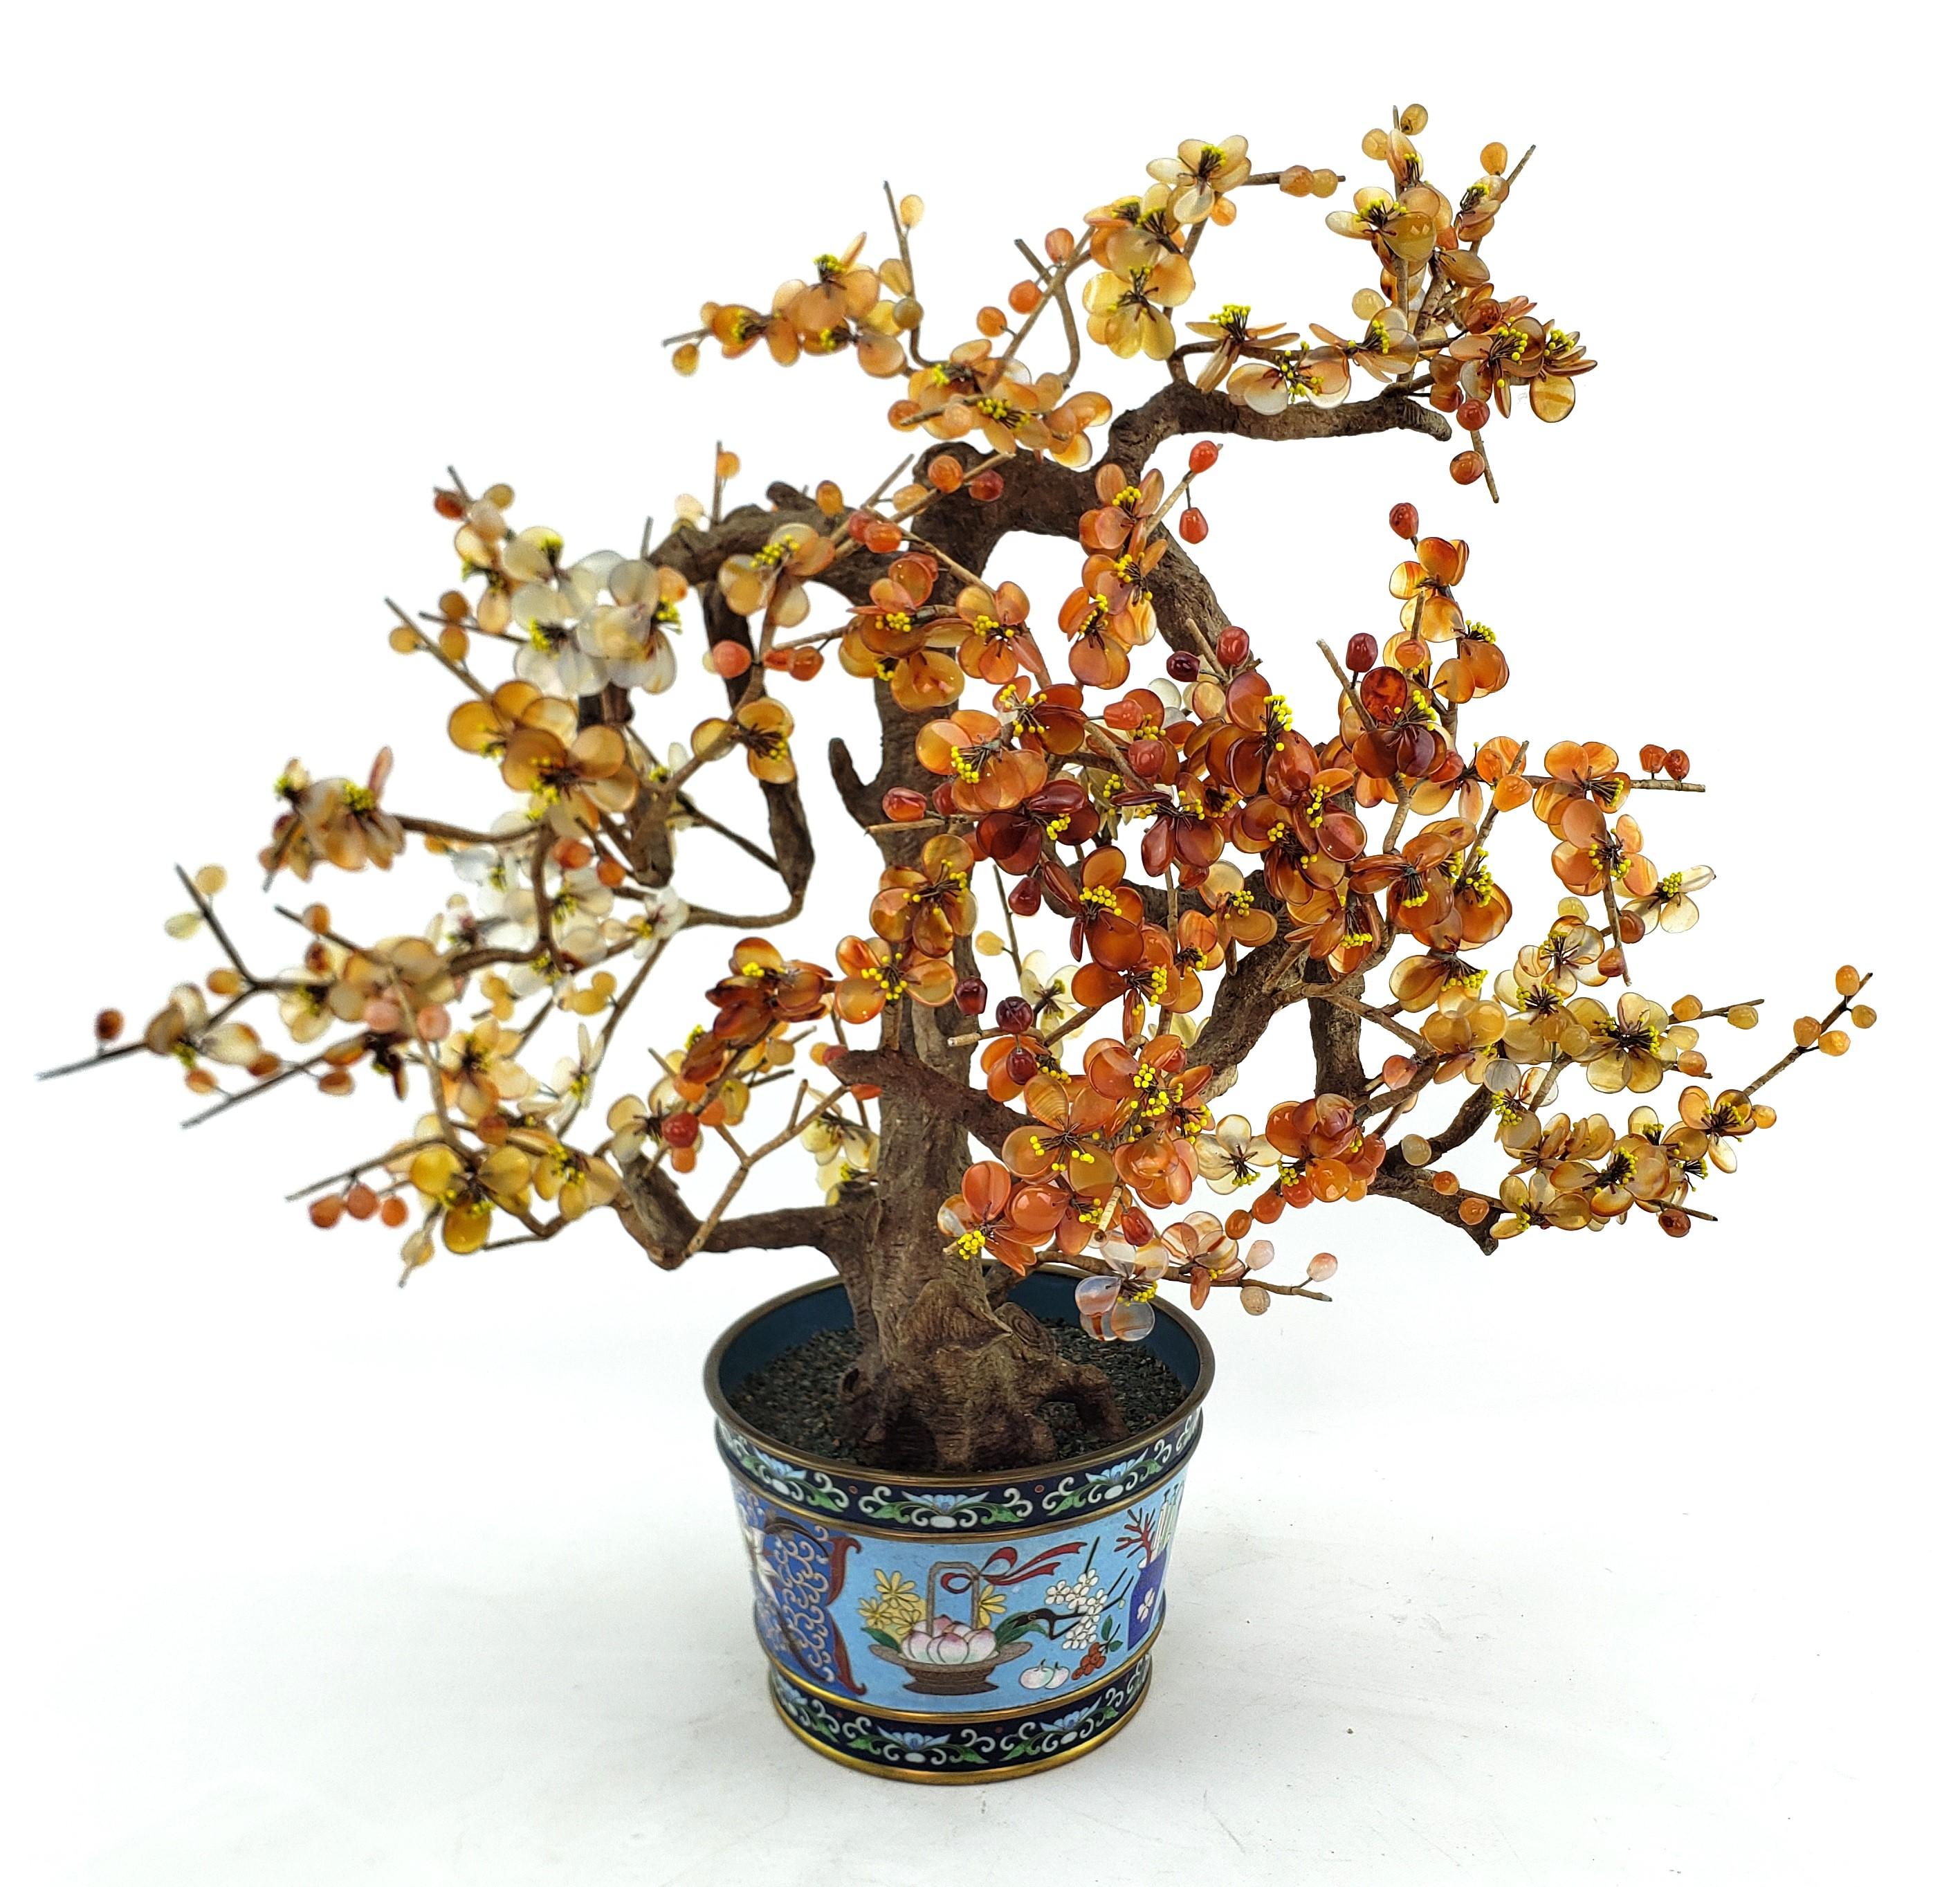 Antique Chinese Bonzai Styled Flowering Fruit Tree Sculpture with Cloisonne Pot In Good Condition For Sale In Hamilton, Ontario